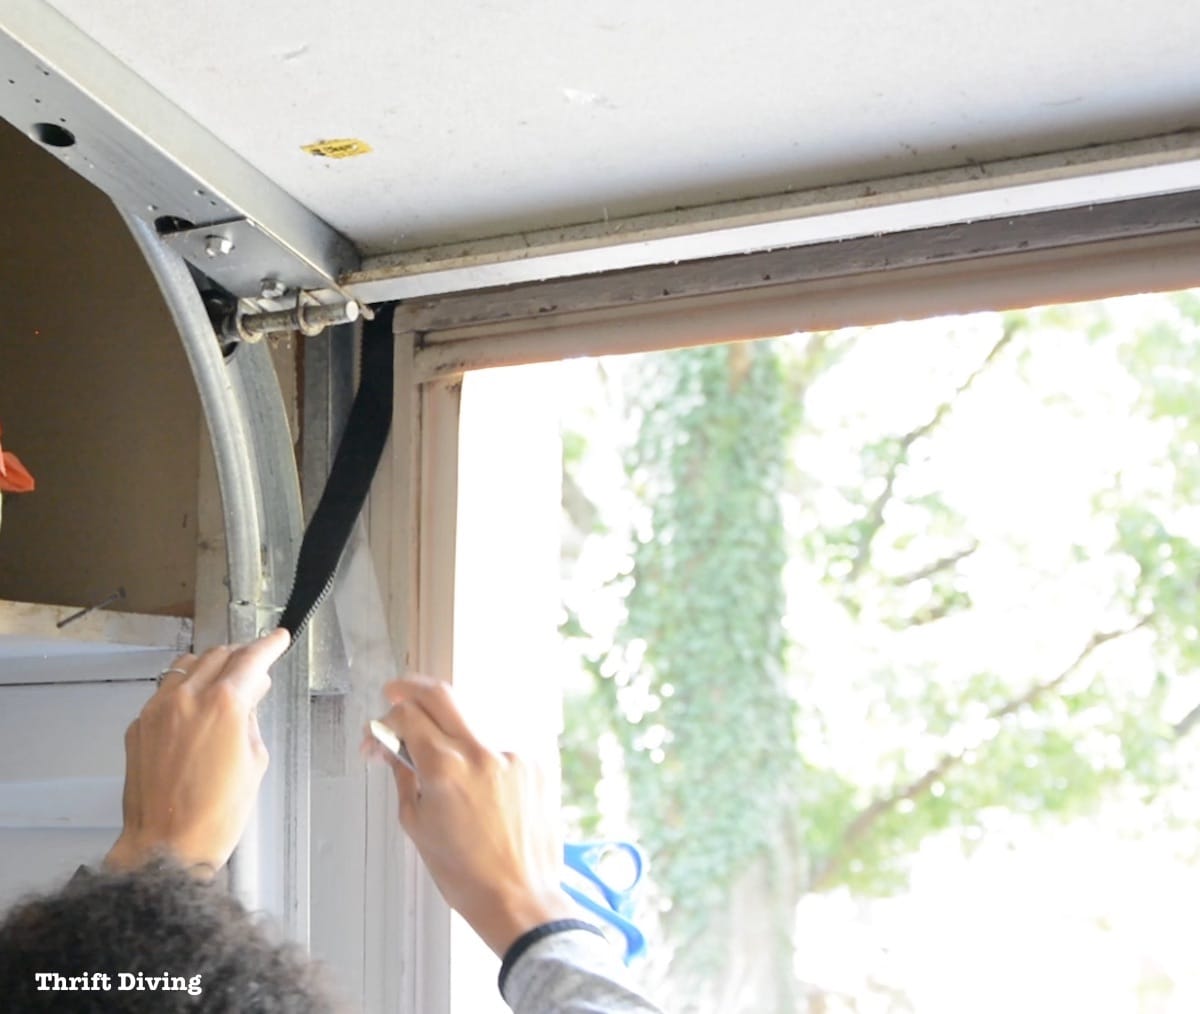 How to Make a Garage Door Screen - Apply the Velcro brand fastener to the perimeter of your garage. Keep out flying insects, such as mosquitos, stink bugs, bees, moths, flies, and gnats. - Thrift Diving